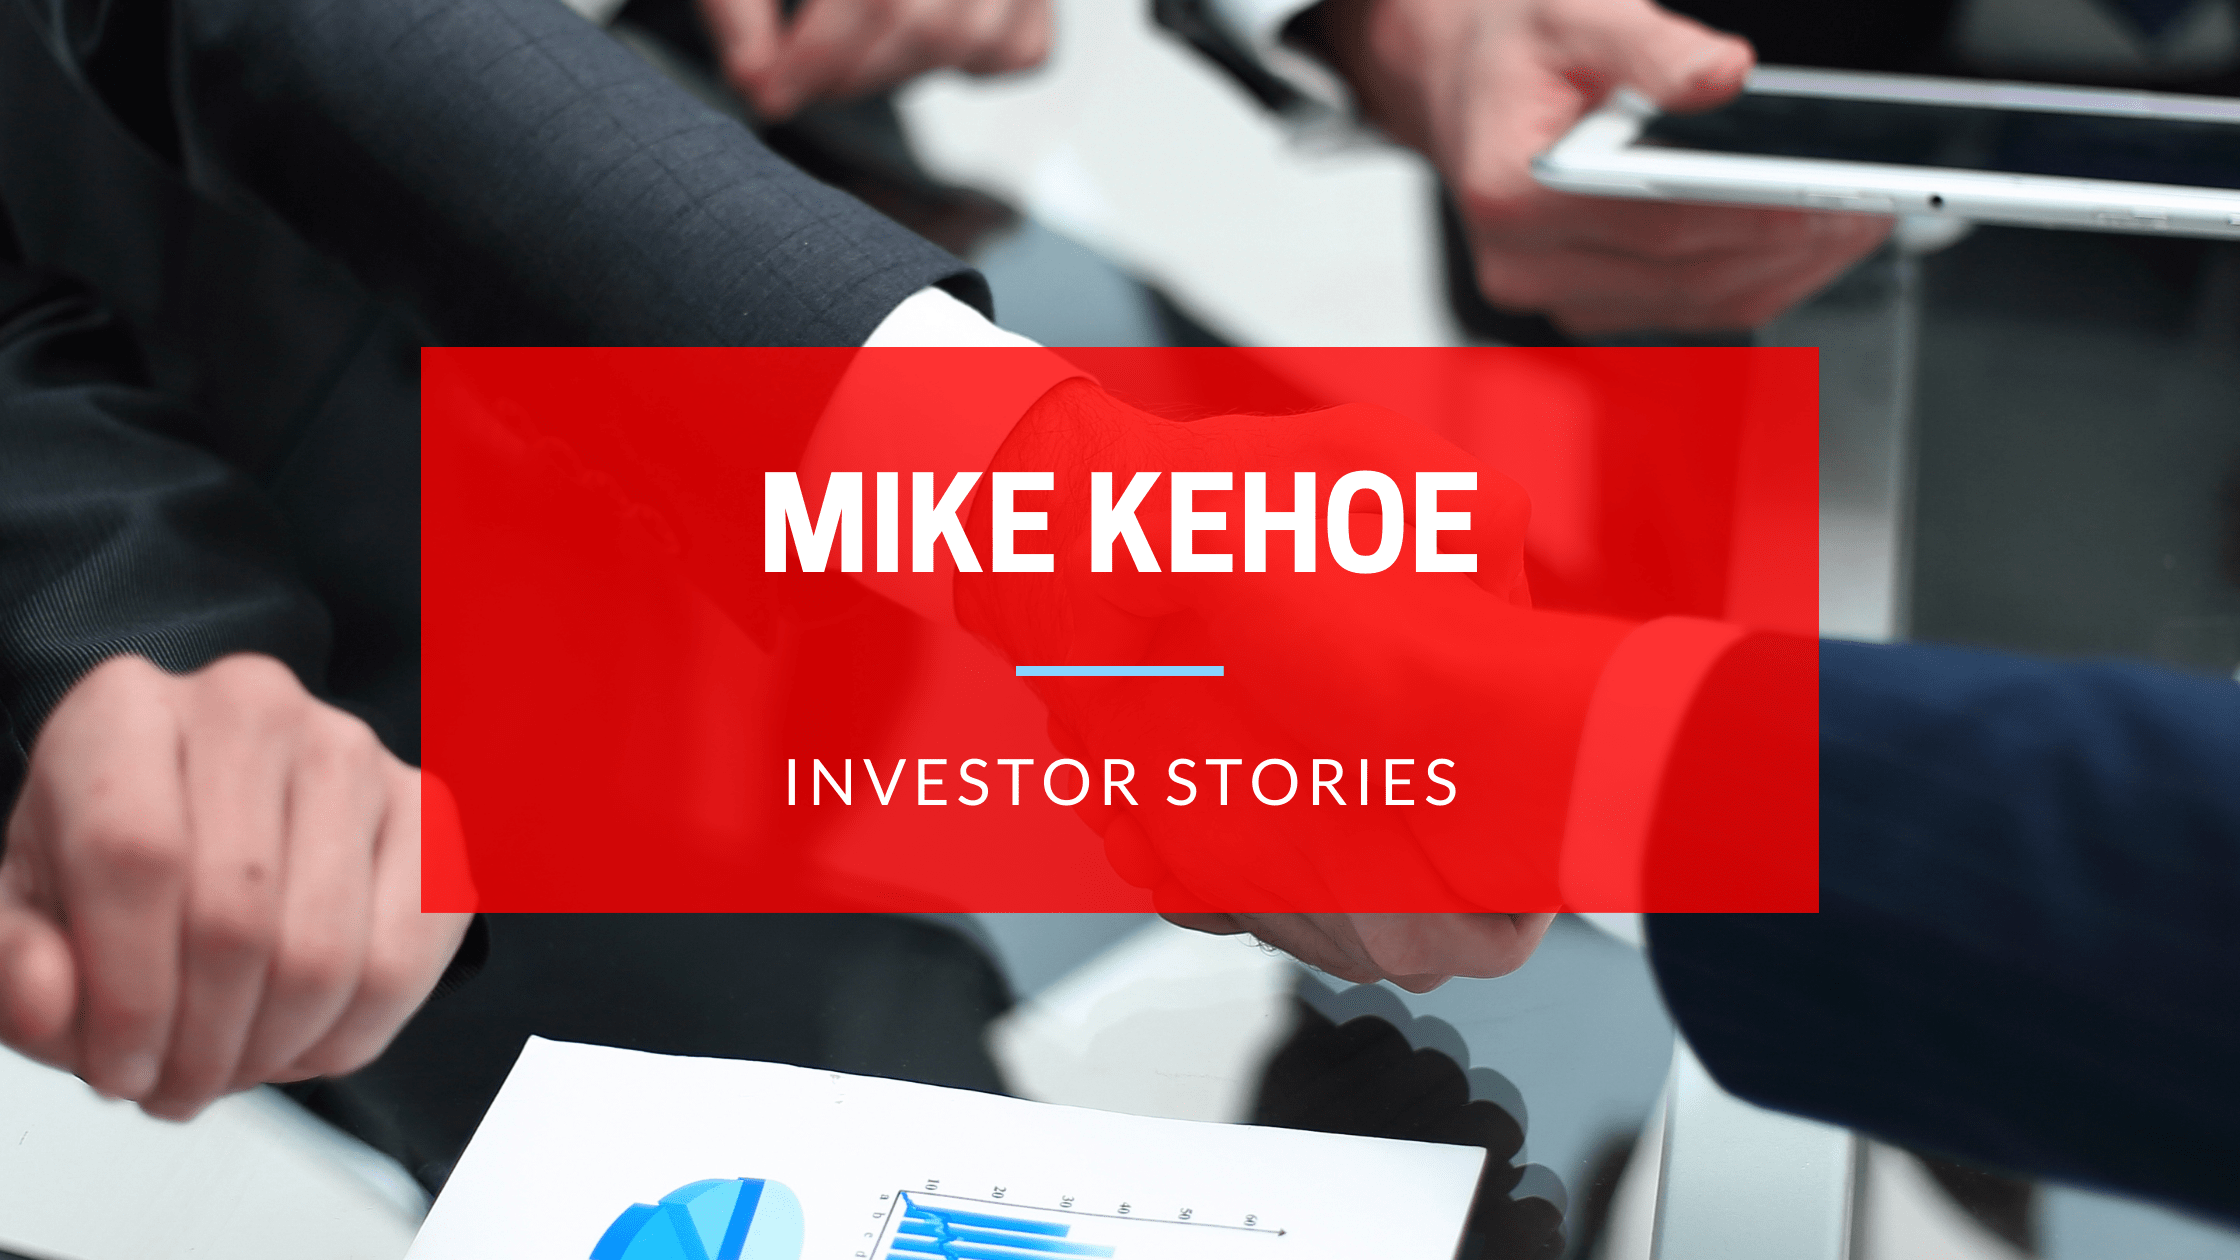 INVESTOR STORIES FEATURING MIKE KEHOE